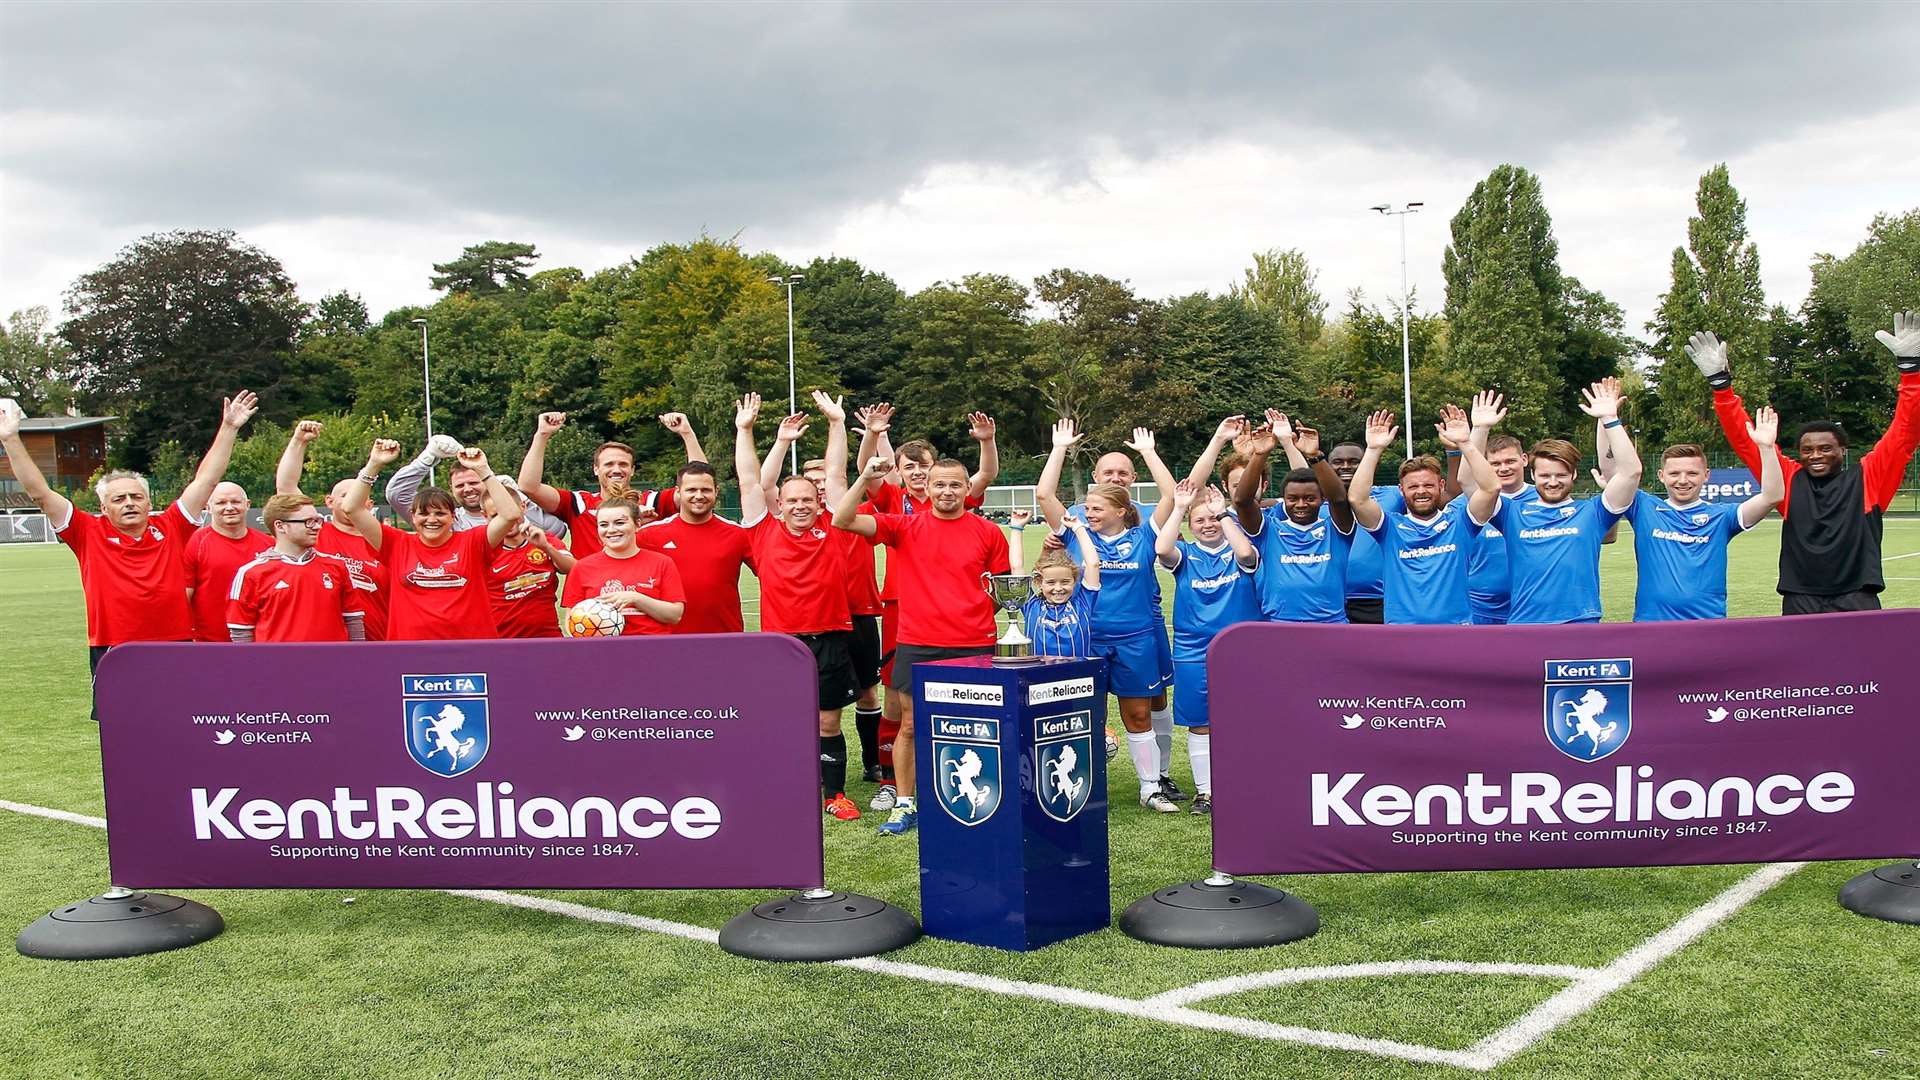 The Kent Reliance and Kent FA team and opponents Demelza House at the Community Day